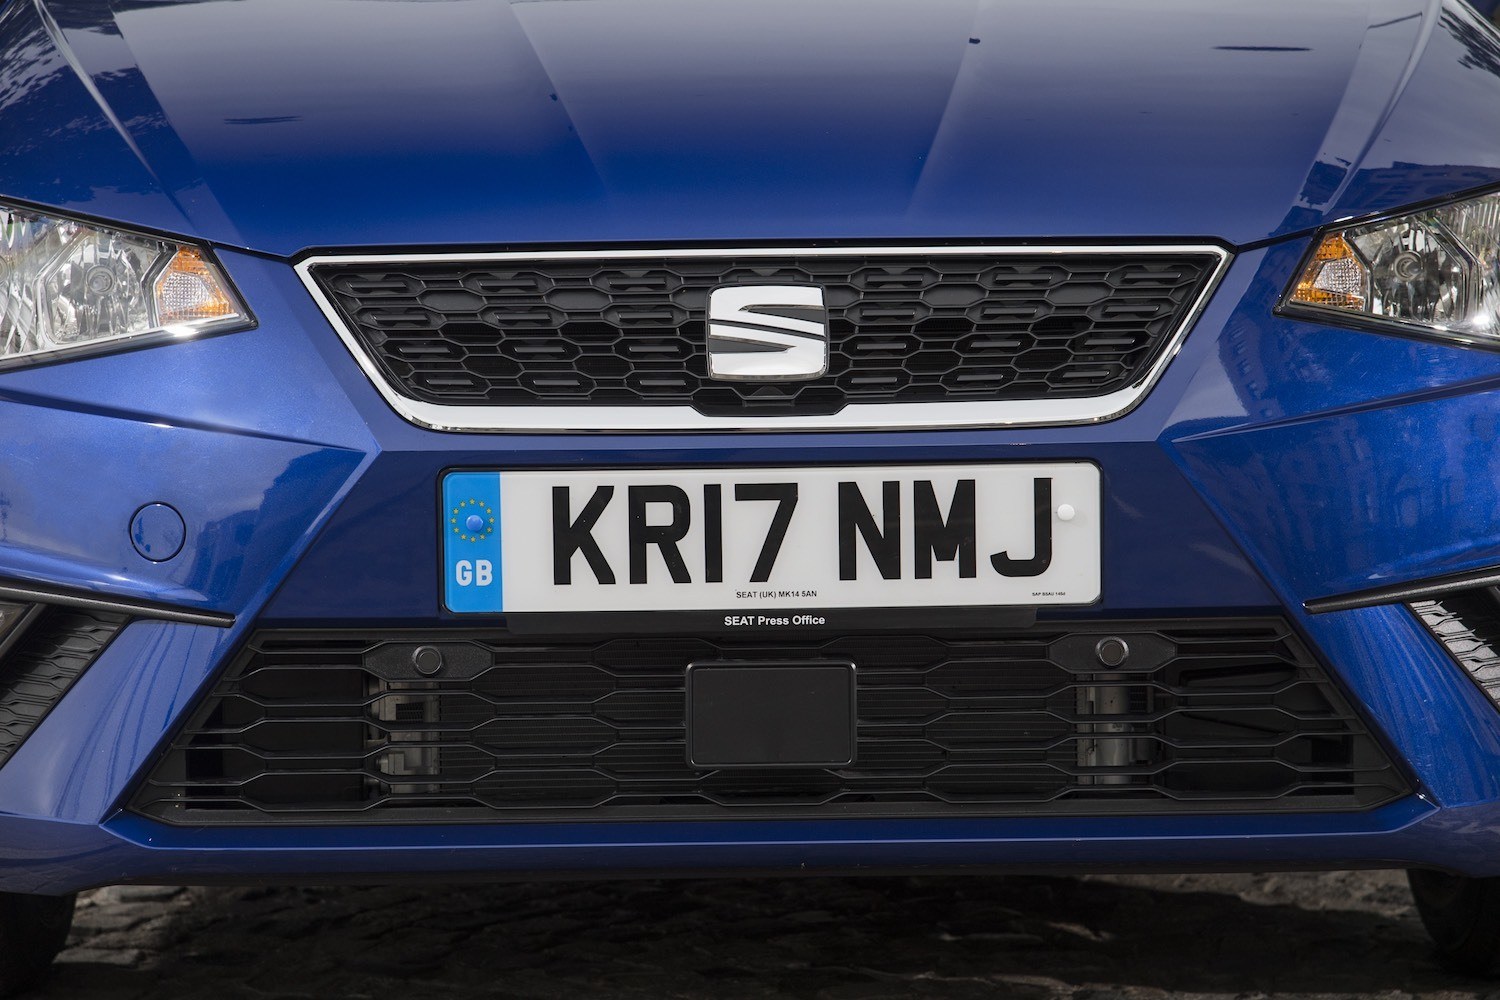 Tom Scanlan reviews the New SEAT Ibiza SE for Drive 24